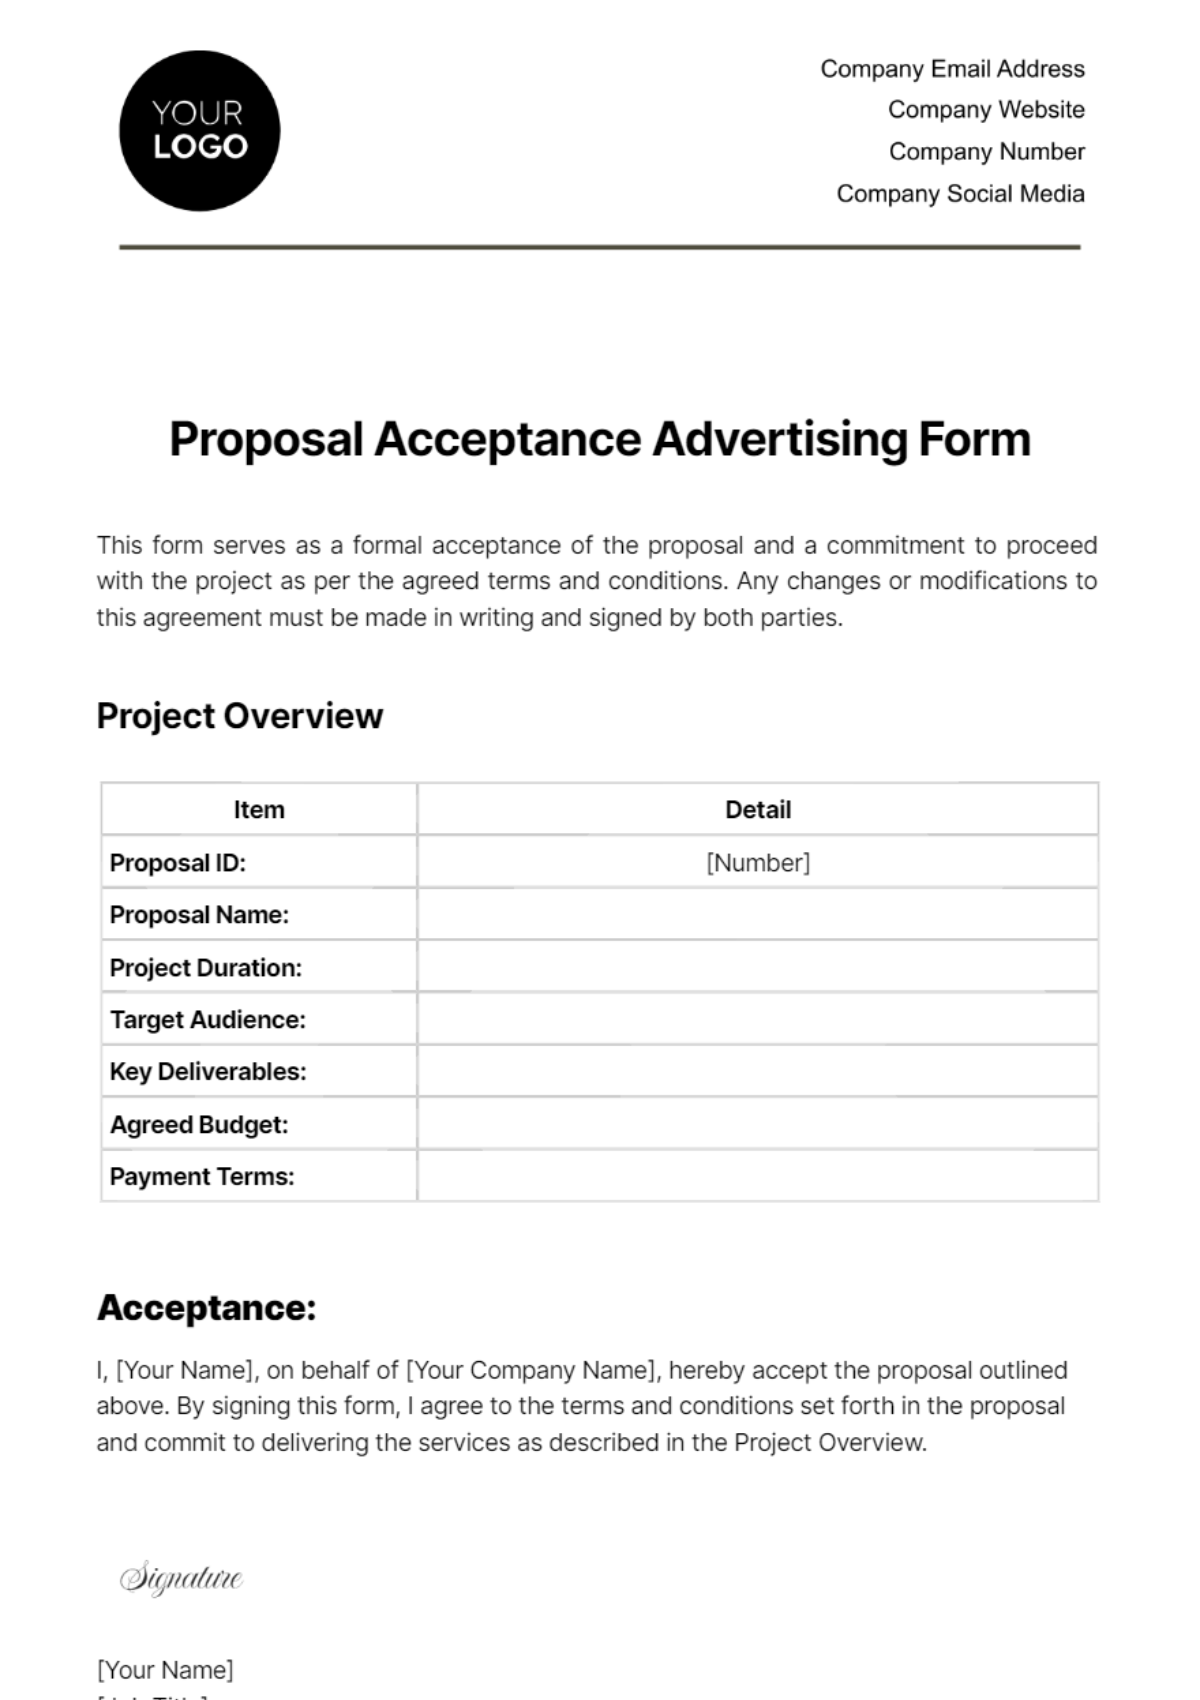 Proposal Acceptance Advertising Form Template